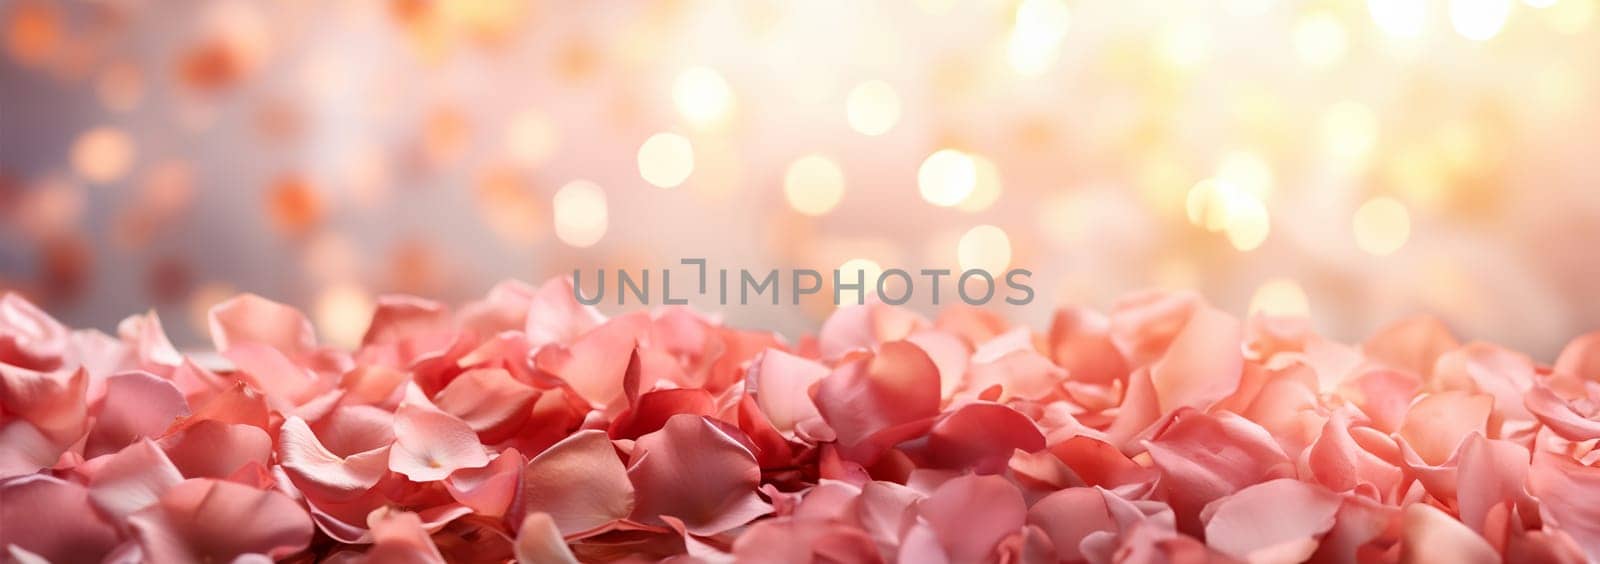 Pink rose petals on soft pink background. Petals of pink rose spa background. Realistic flying sakura cherry flower petals elements for romantic banner design. Copy space Valentine's Day concept. by Annebel146